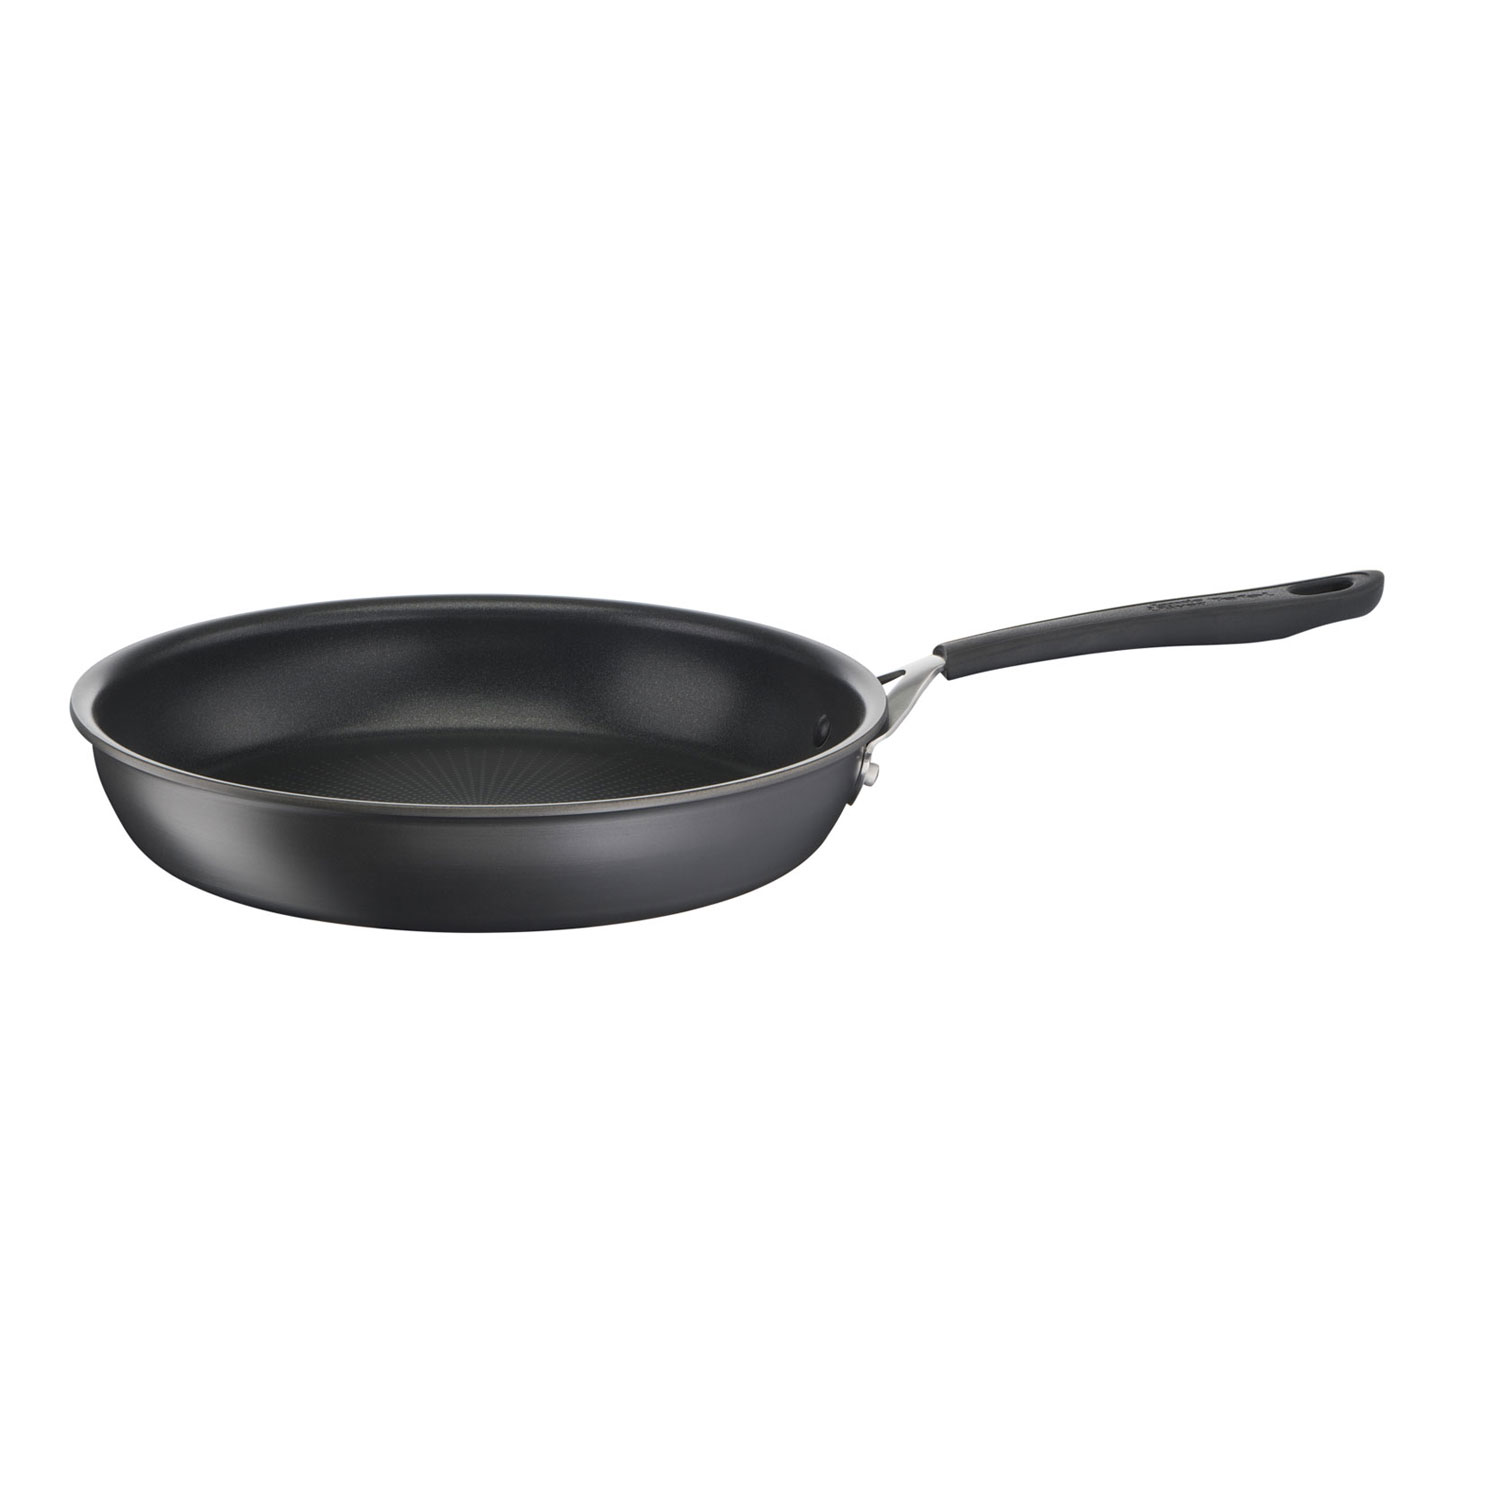 Satake frying pan in lightweight cast iron 28 cm - Buy Knives and